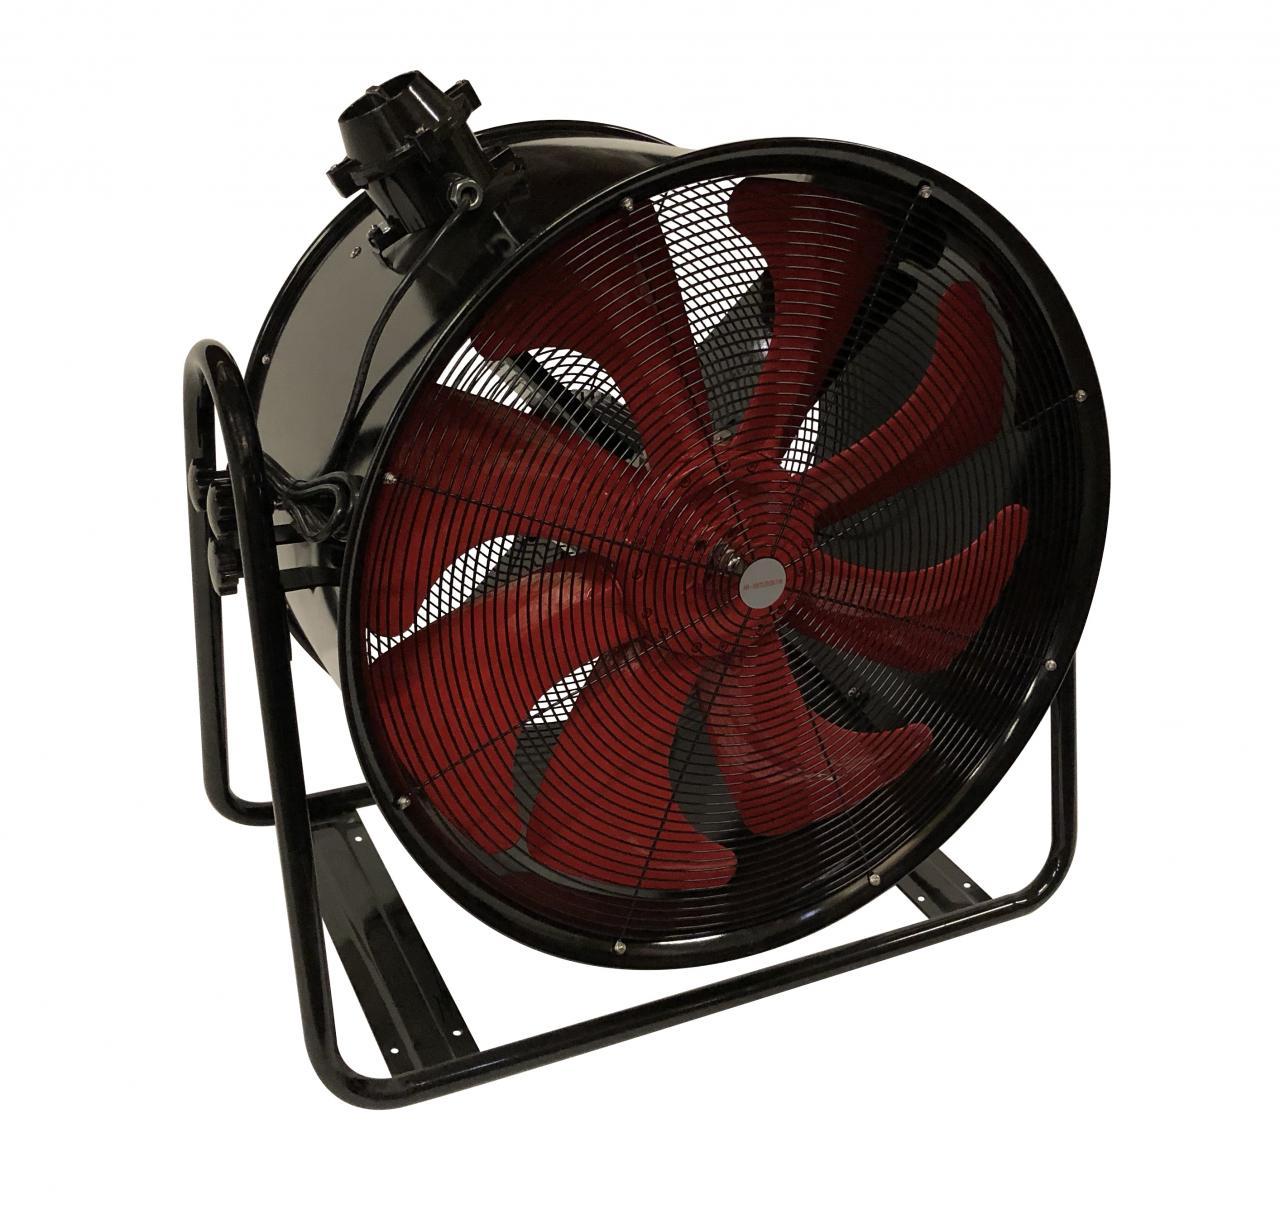 8 Portable Industrial Ventilation Fan With 32' Flexible Duct